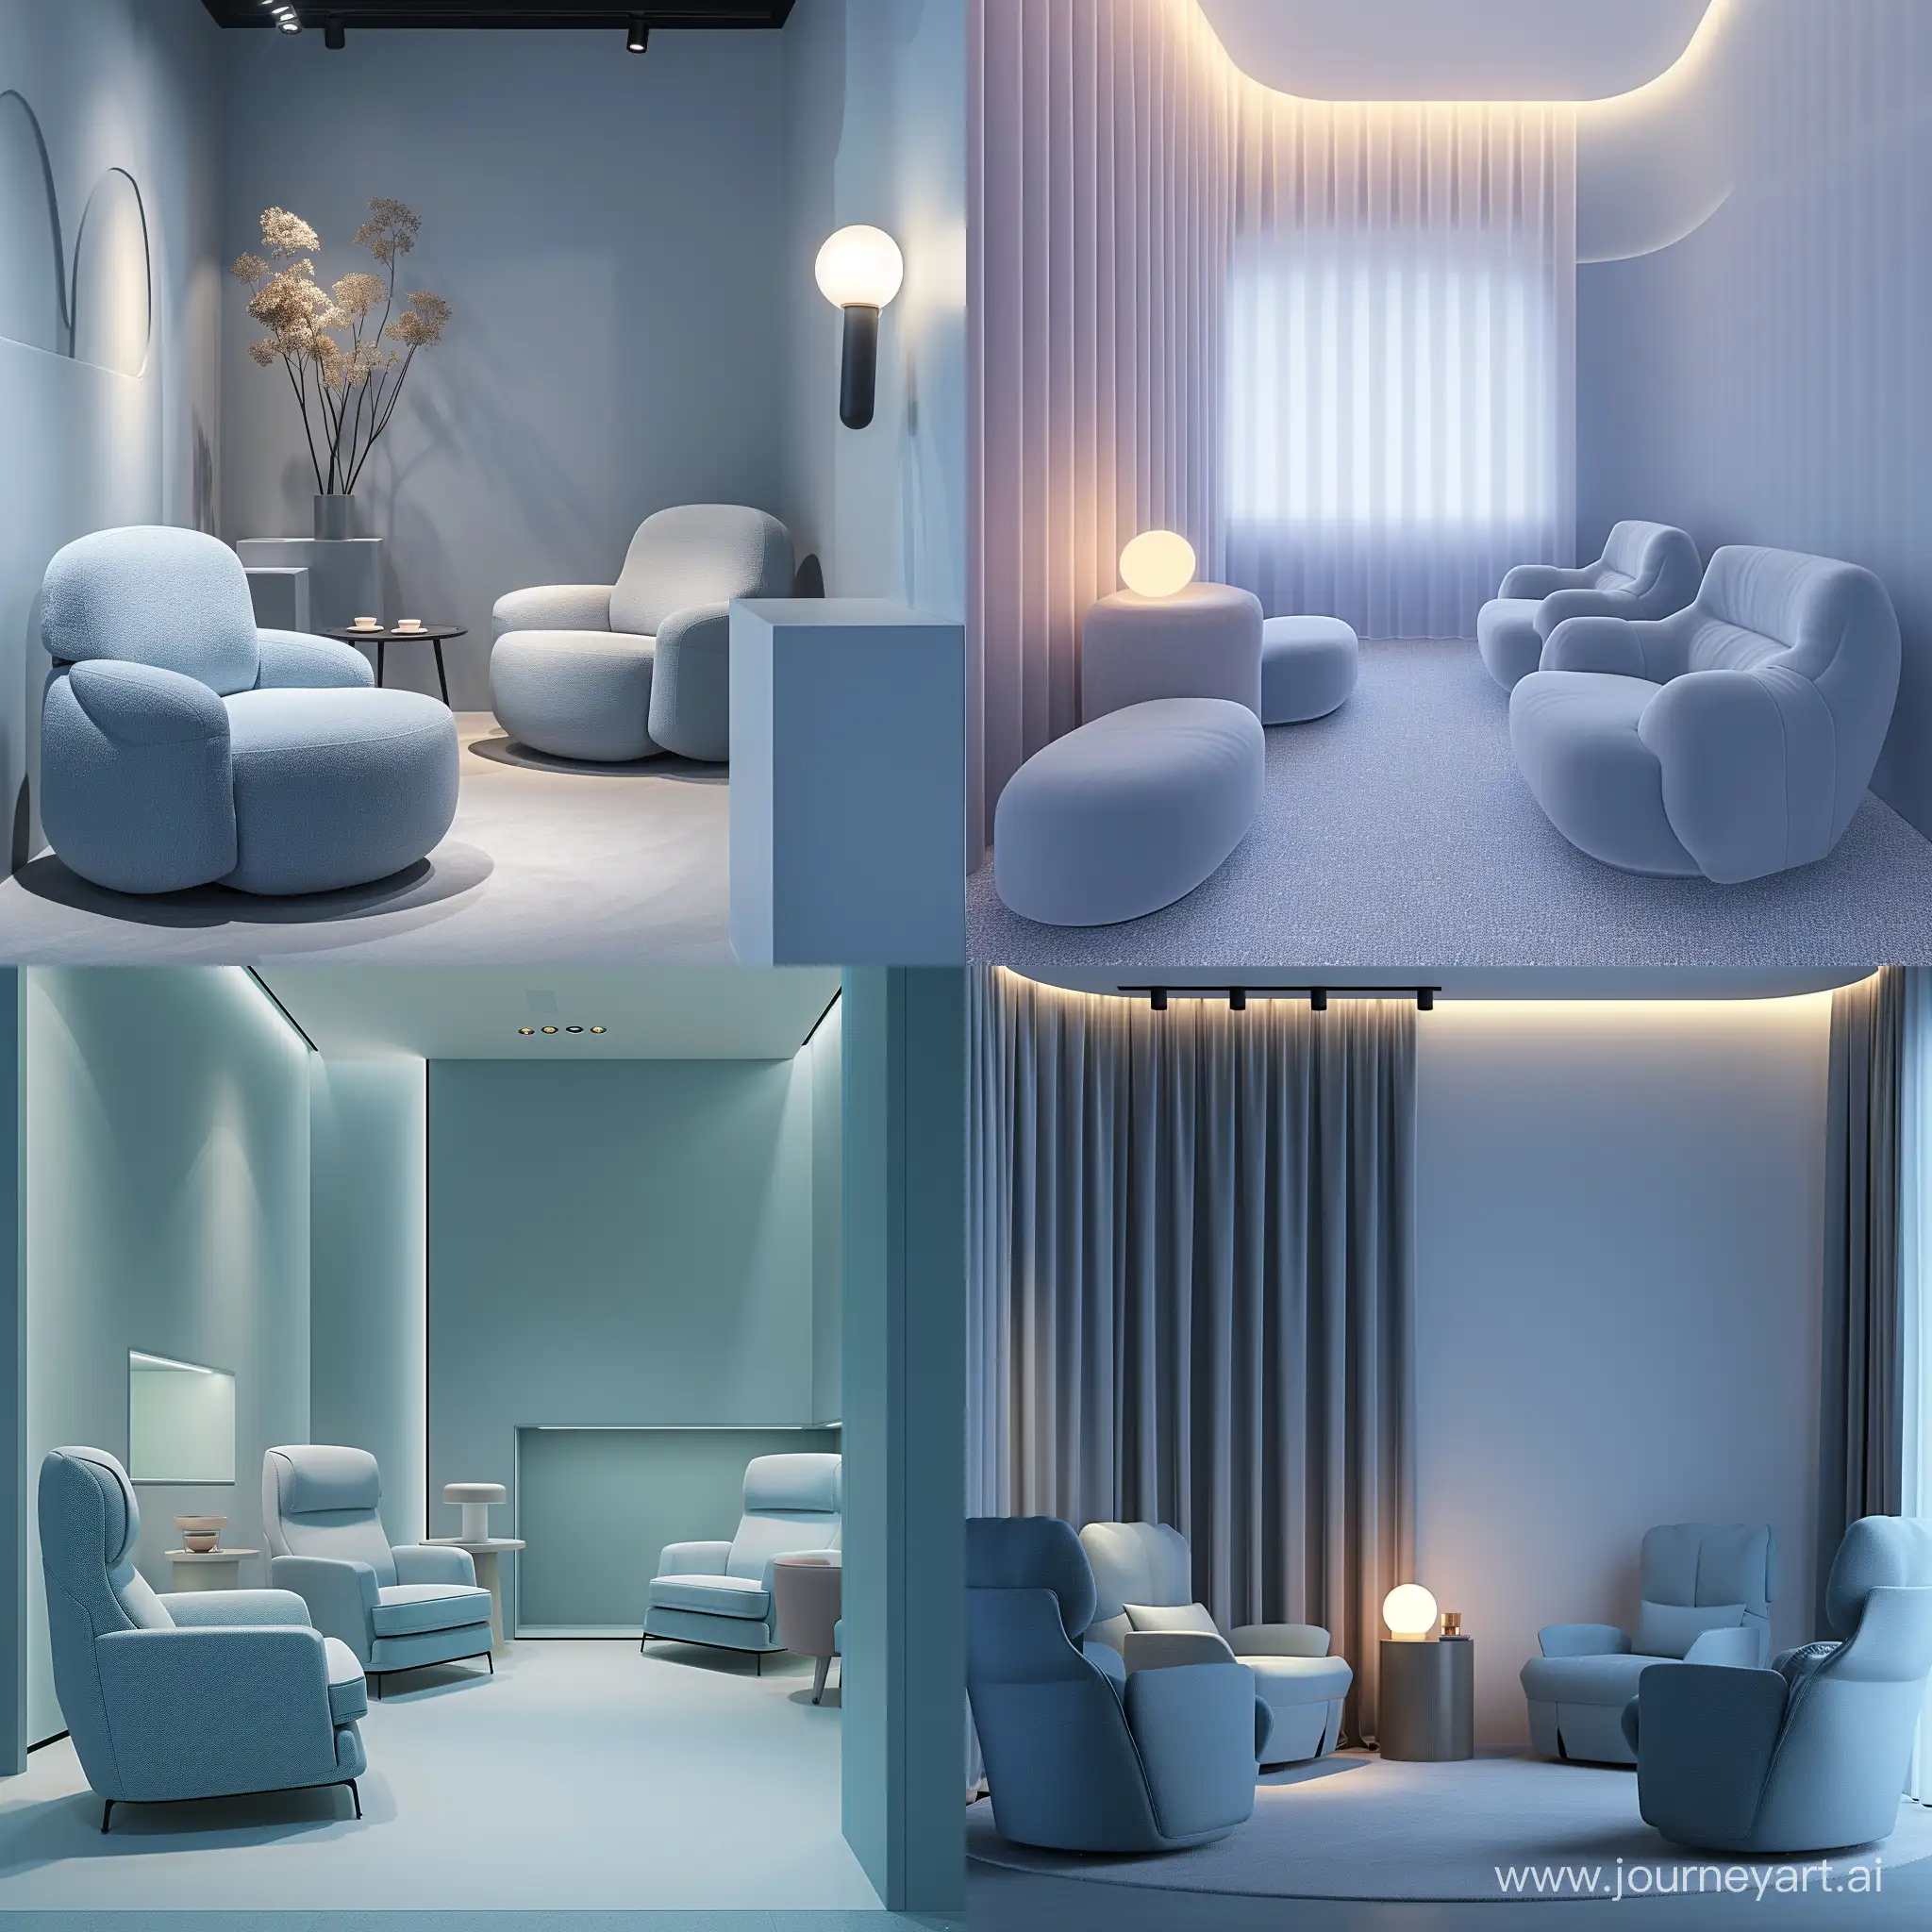 imagine an image of Private Viewing Room (6.75 sqm) of kids chair showroom: The Private Viewing Room offers a tranquil retreat in soft blues or greys, furnished with comfortable, sustainable seating. The room features adjustable lighting, perfect for both relaxed discussions and detailed examination of chairs.realistic style